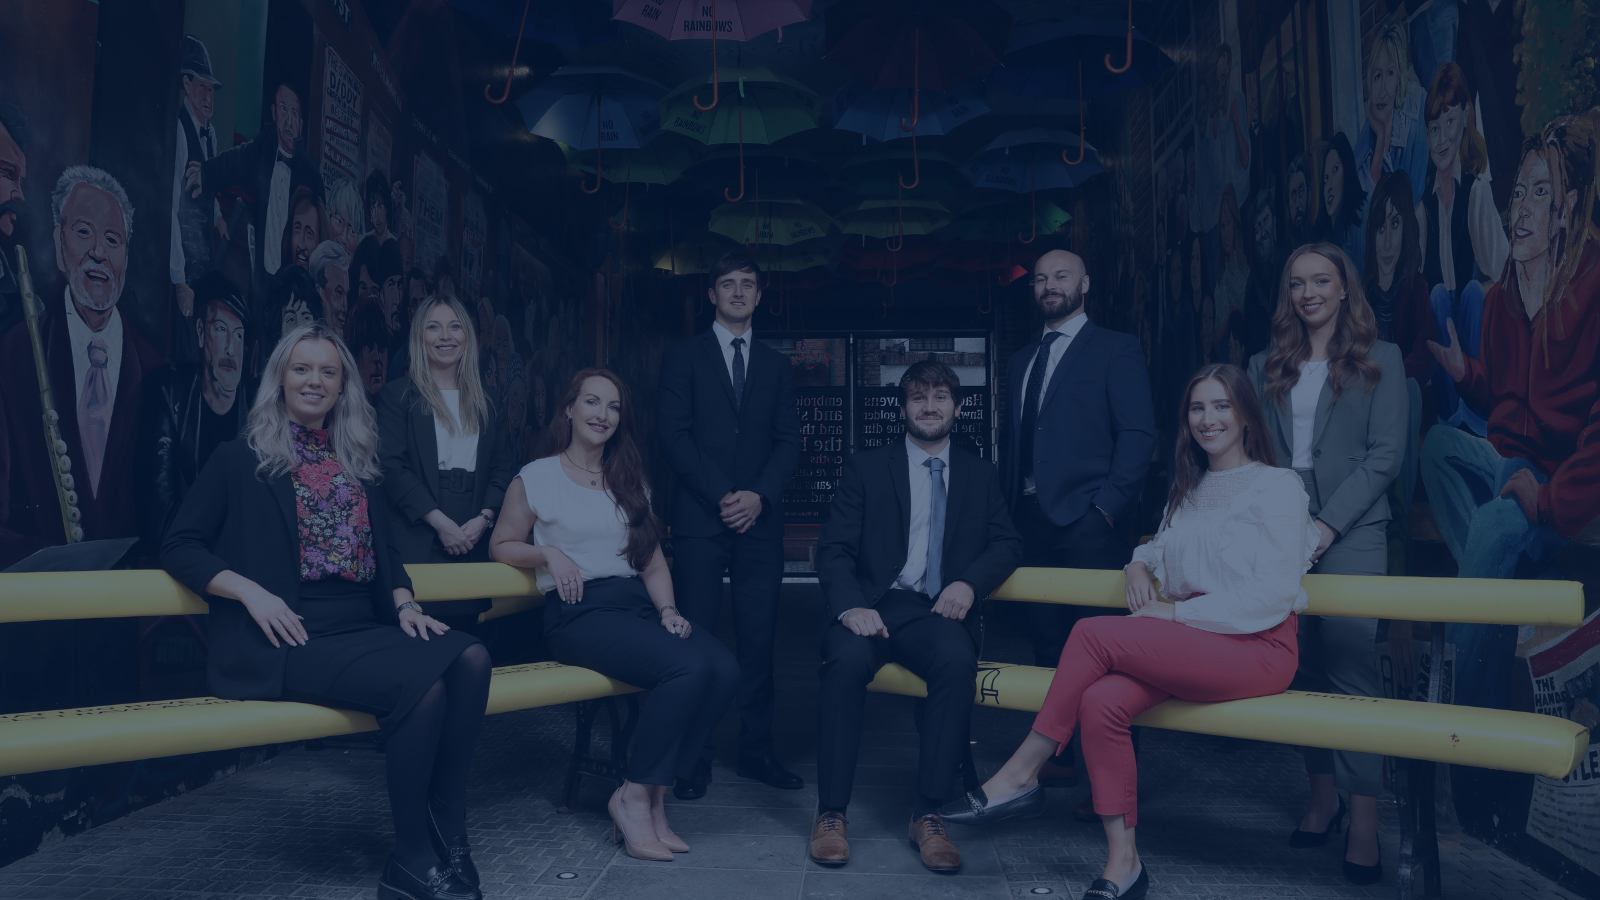 Mills Selig's current trainee Solicitors 